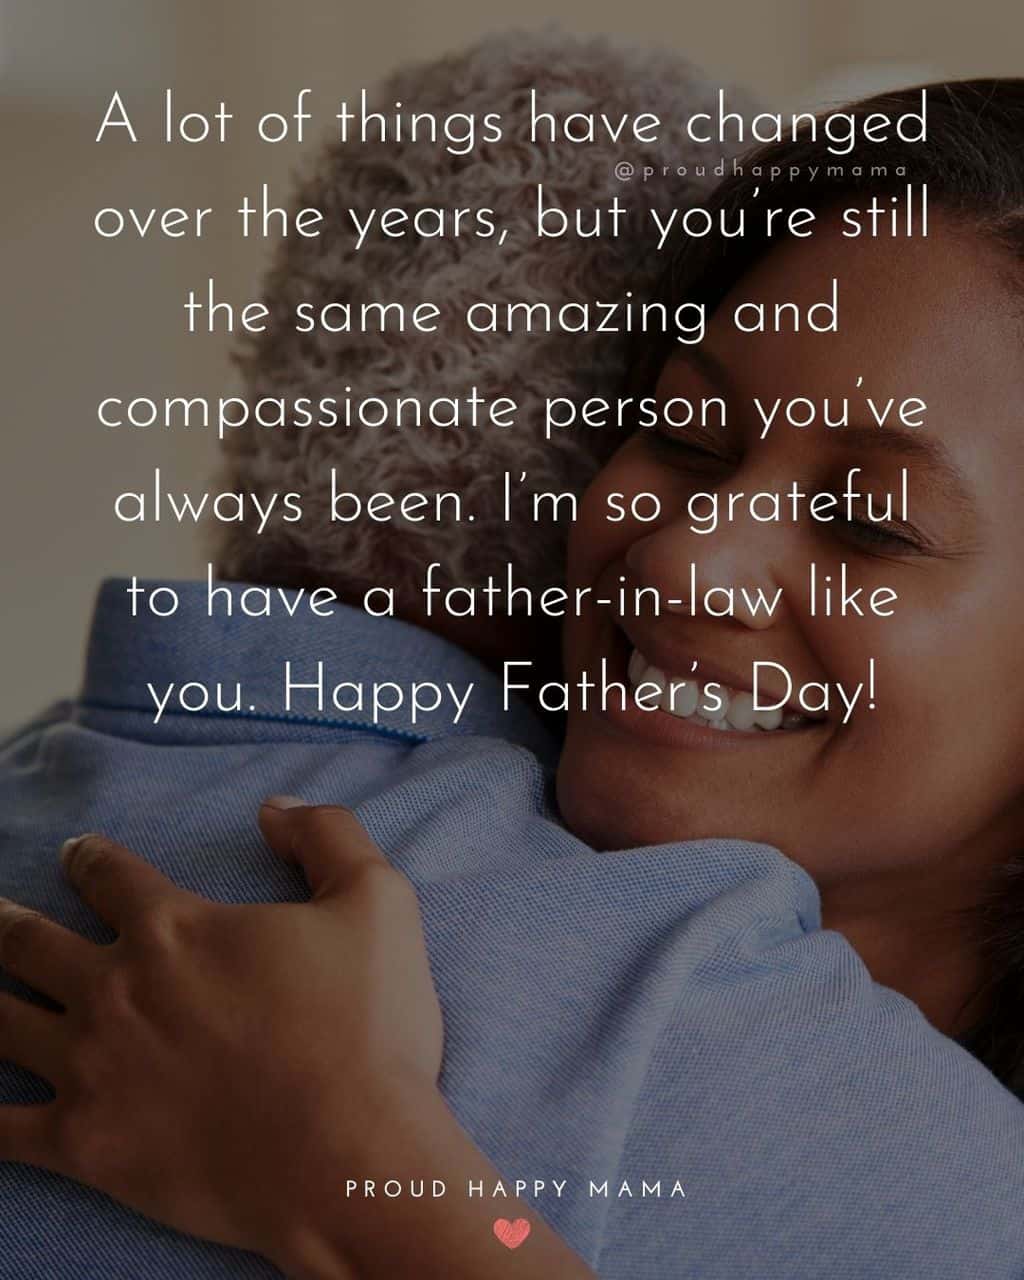 Happy Fathers Day Quotes For Father In Law - A lot of things have changed over the years, but you’re still the same amazing